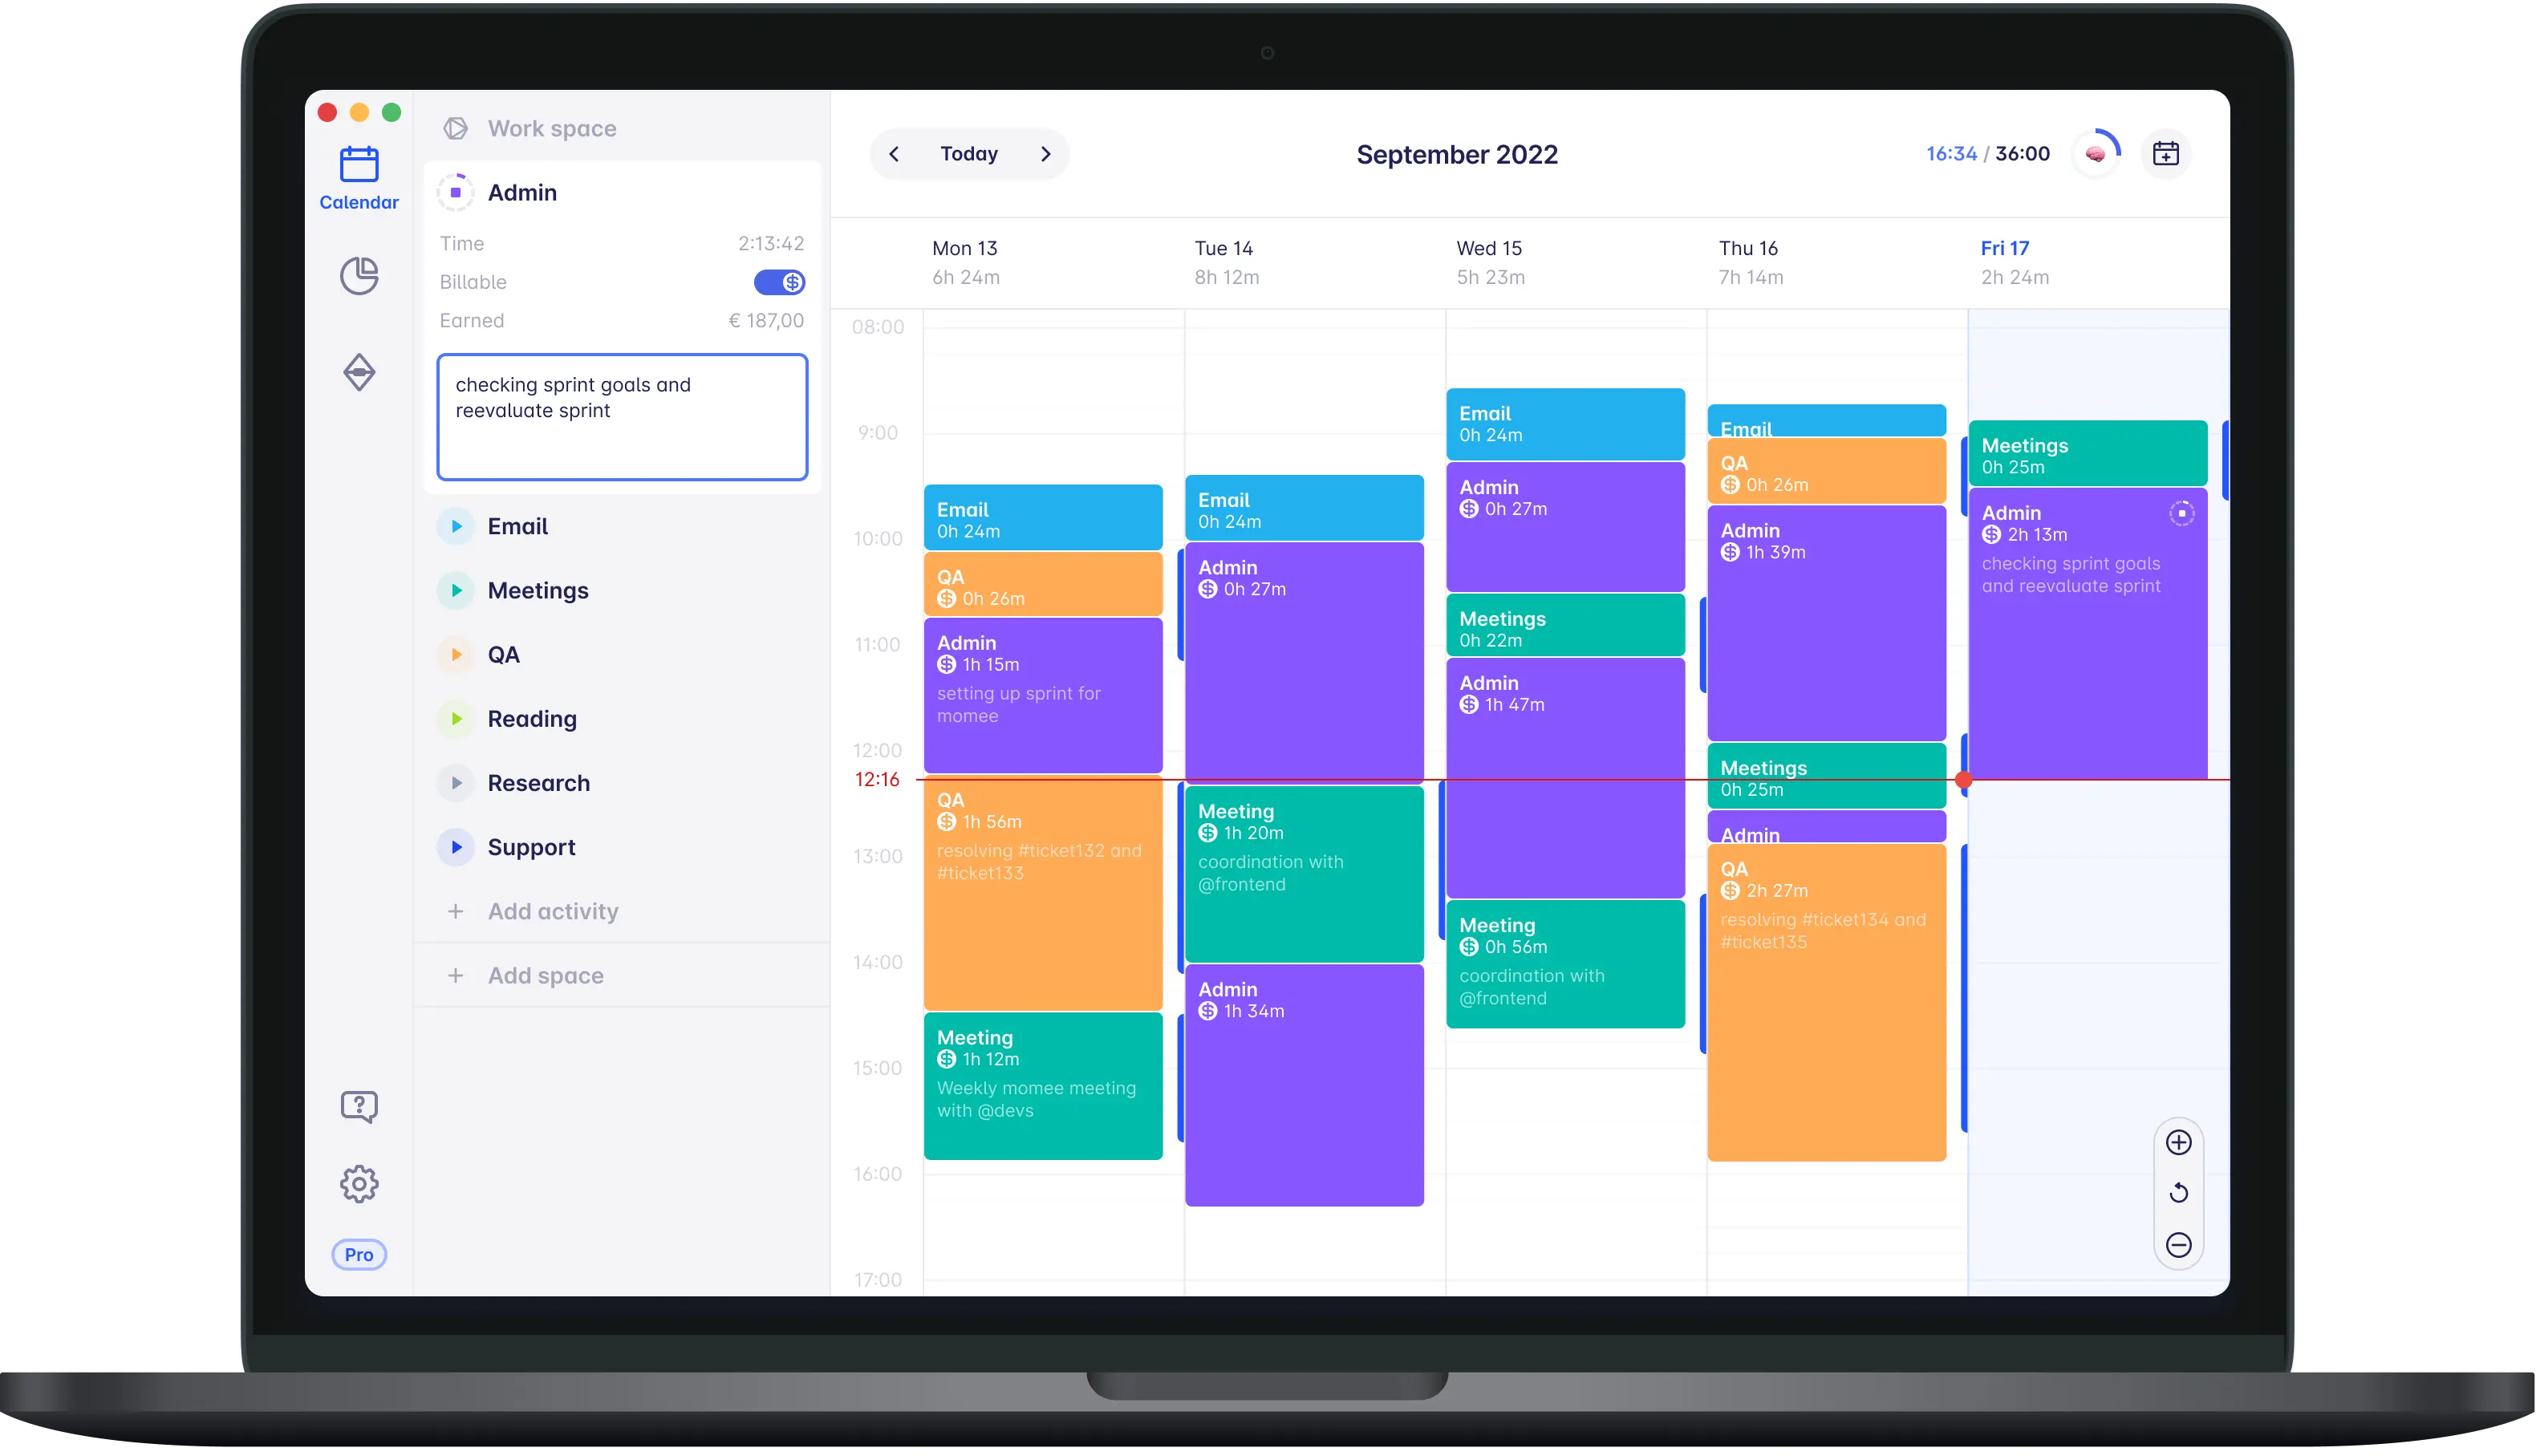 timeular time tracking software calendar view